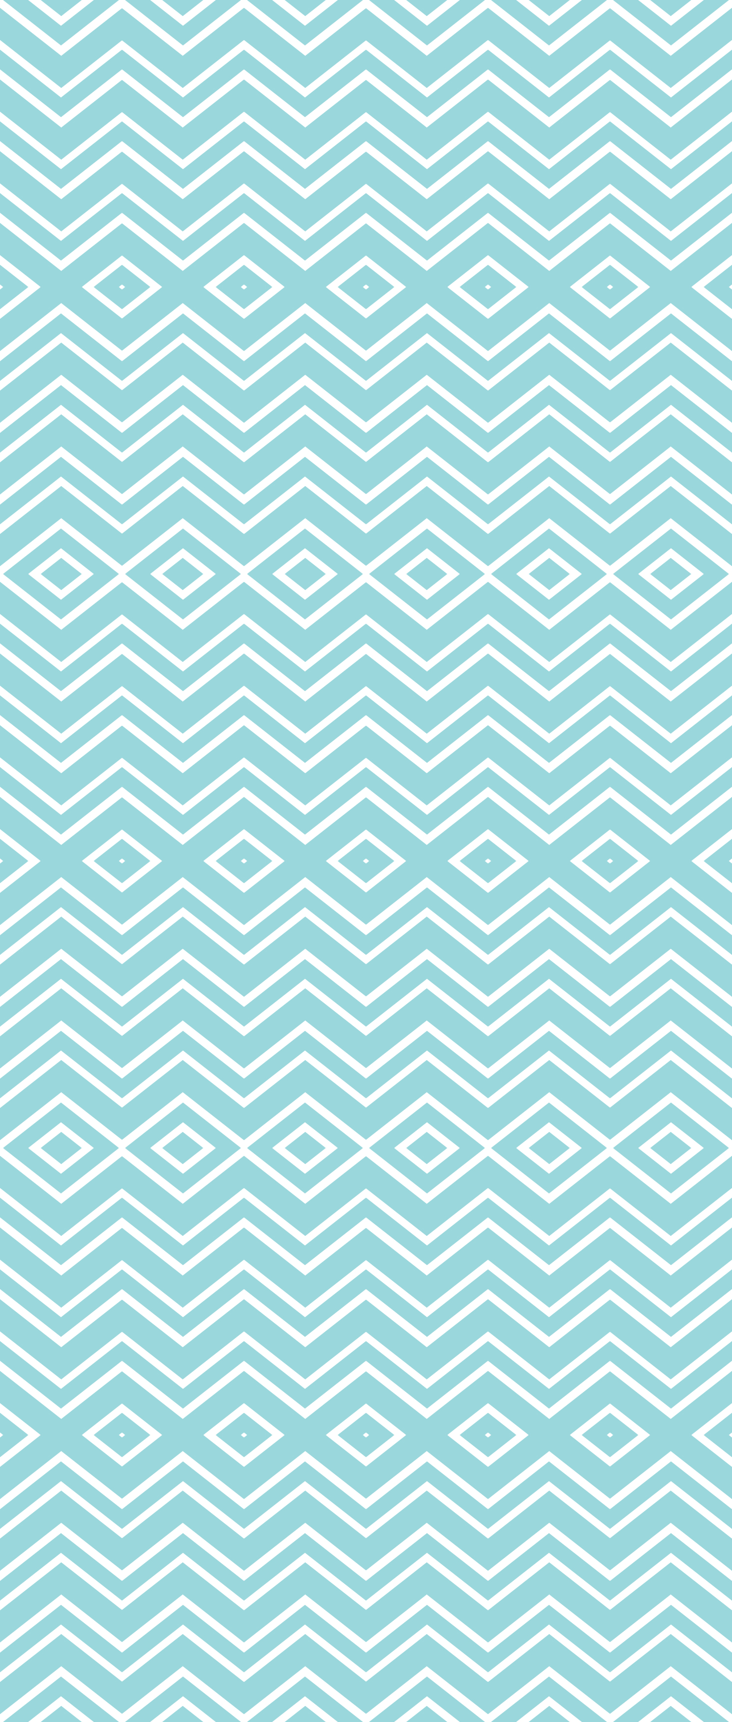 Mint And Black Chevron Background No2 Teal White